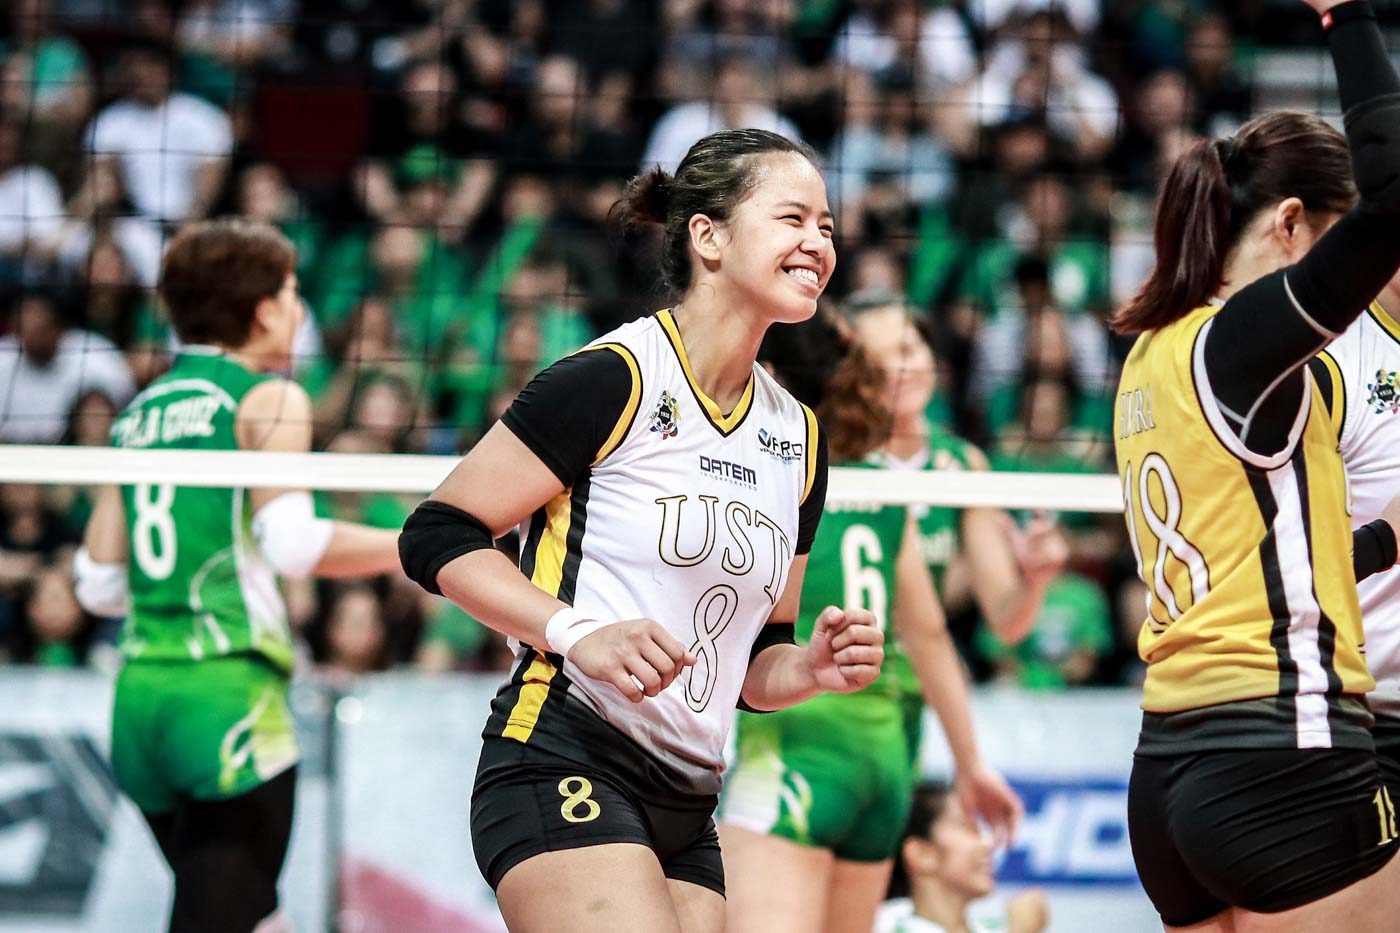 UST downs La Salle dynasty, nails first title berth in 8 seasons